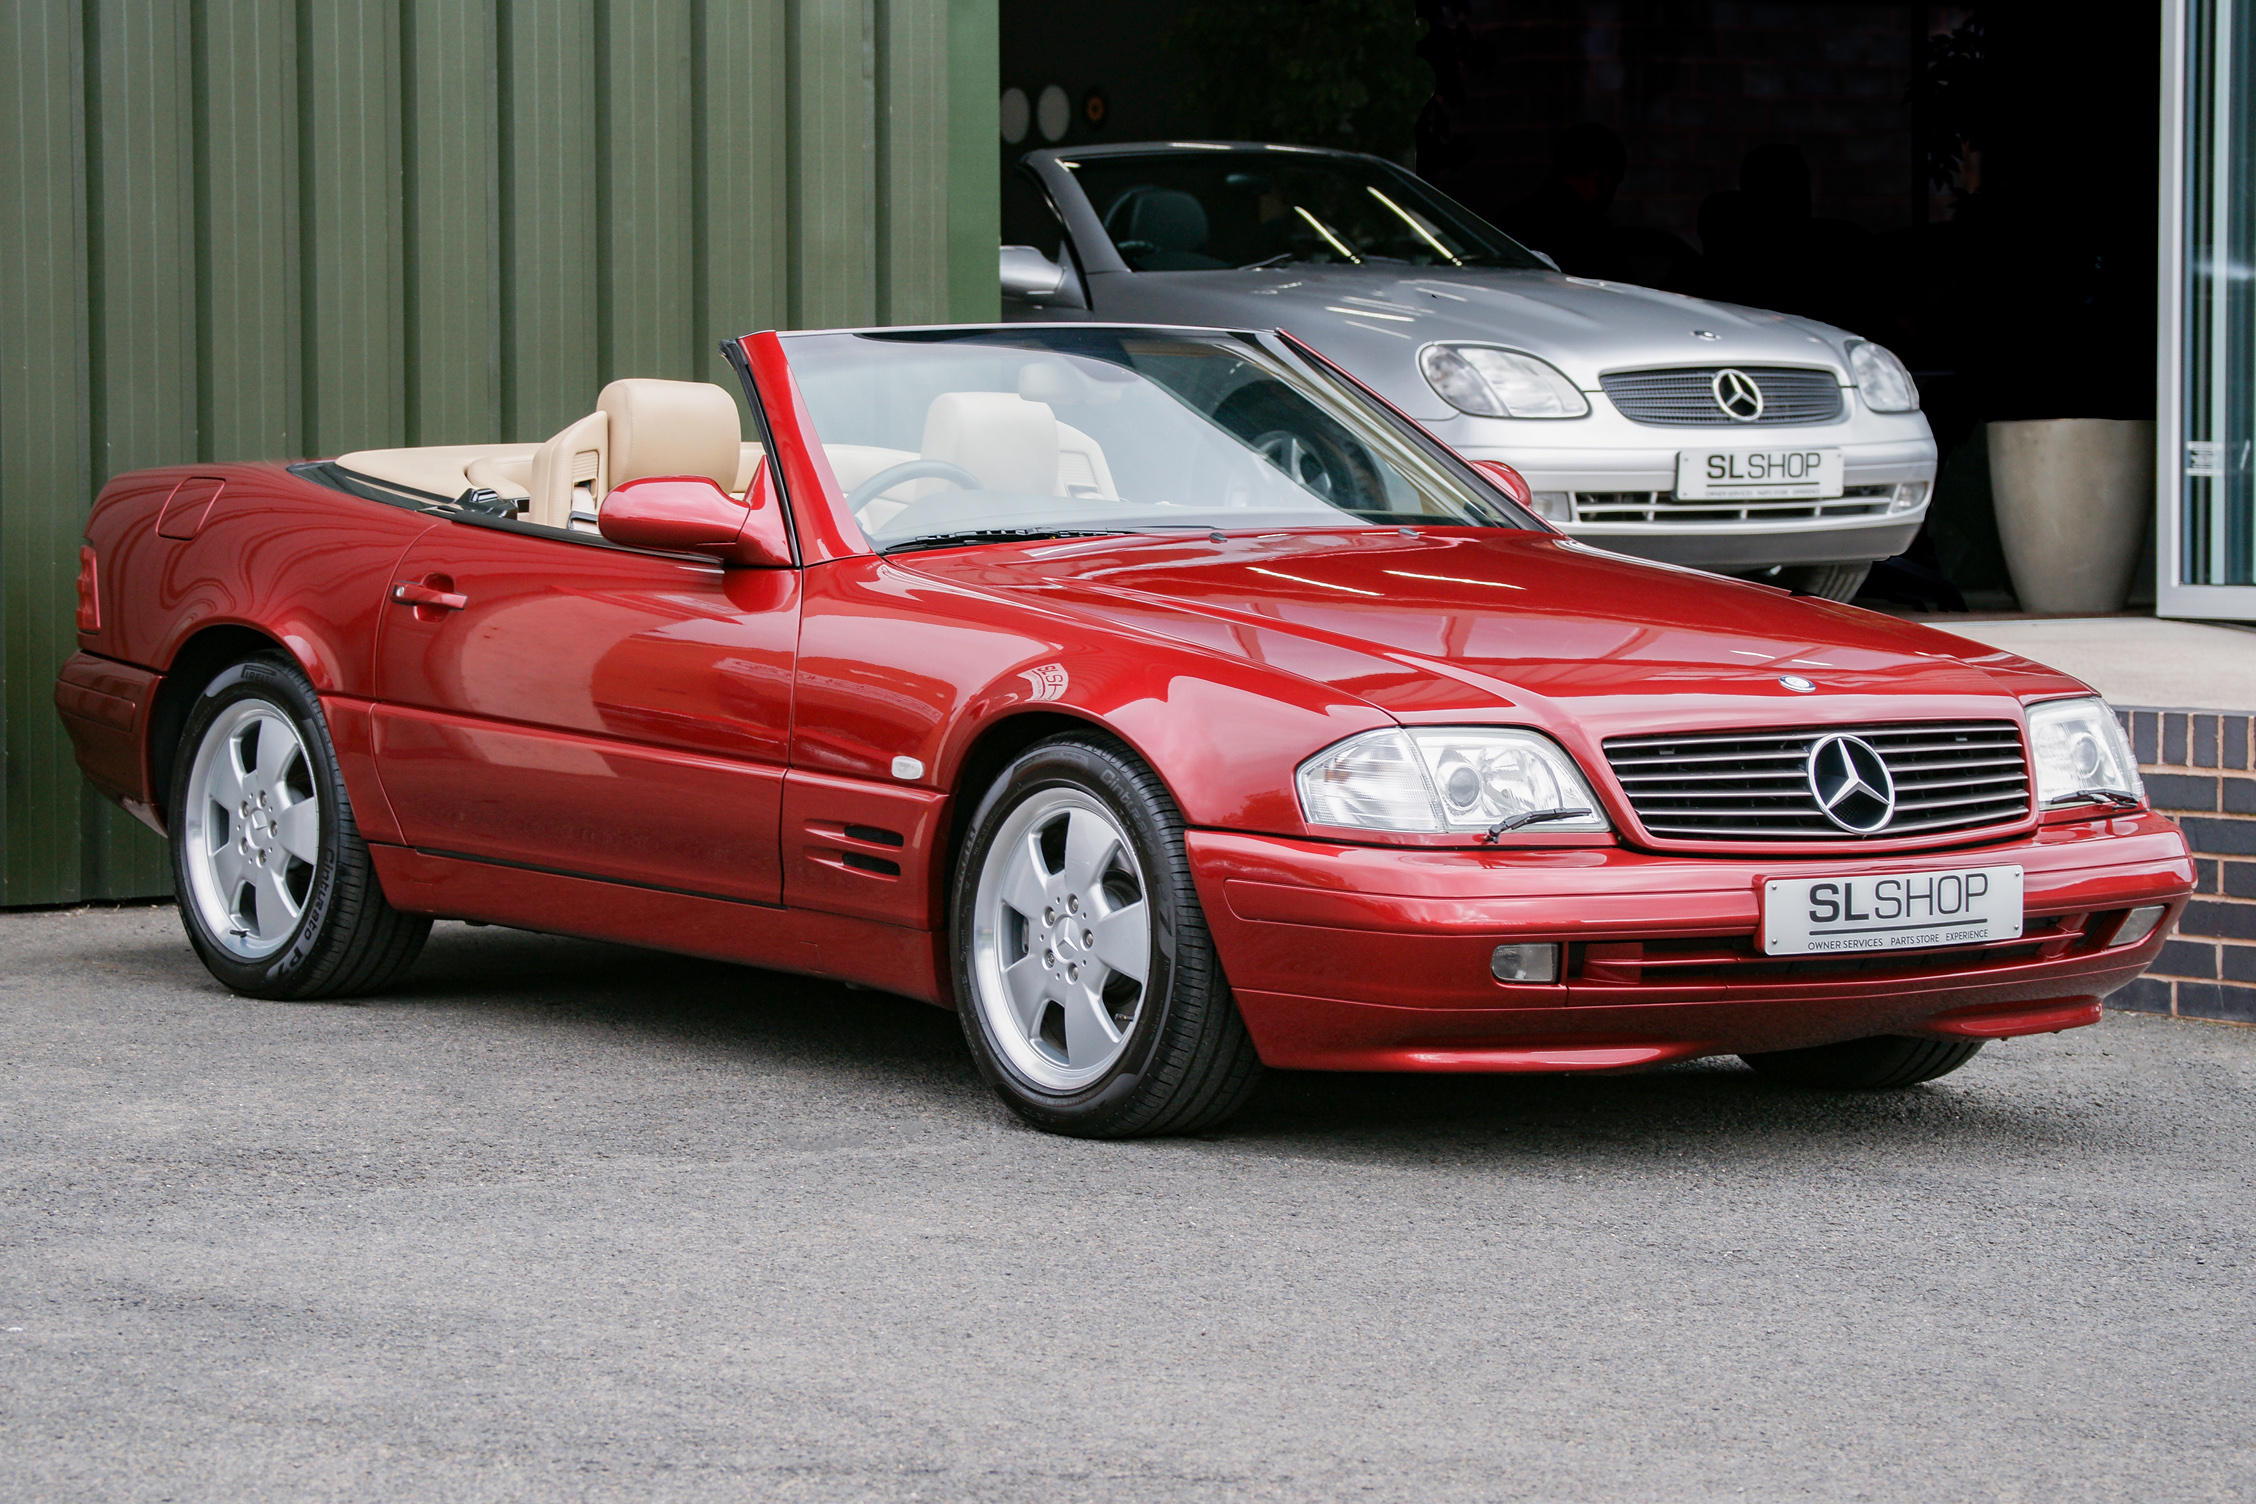 2000 Mercedes-Benz SL280 V6 (R129) #2148 *SOLD* Amber Red with ...